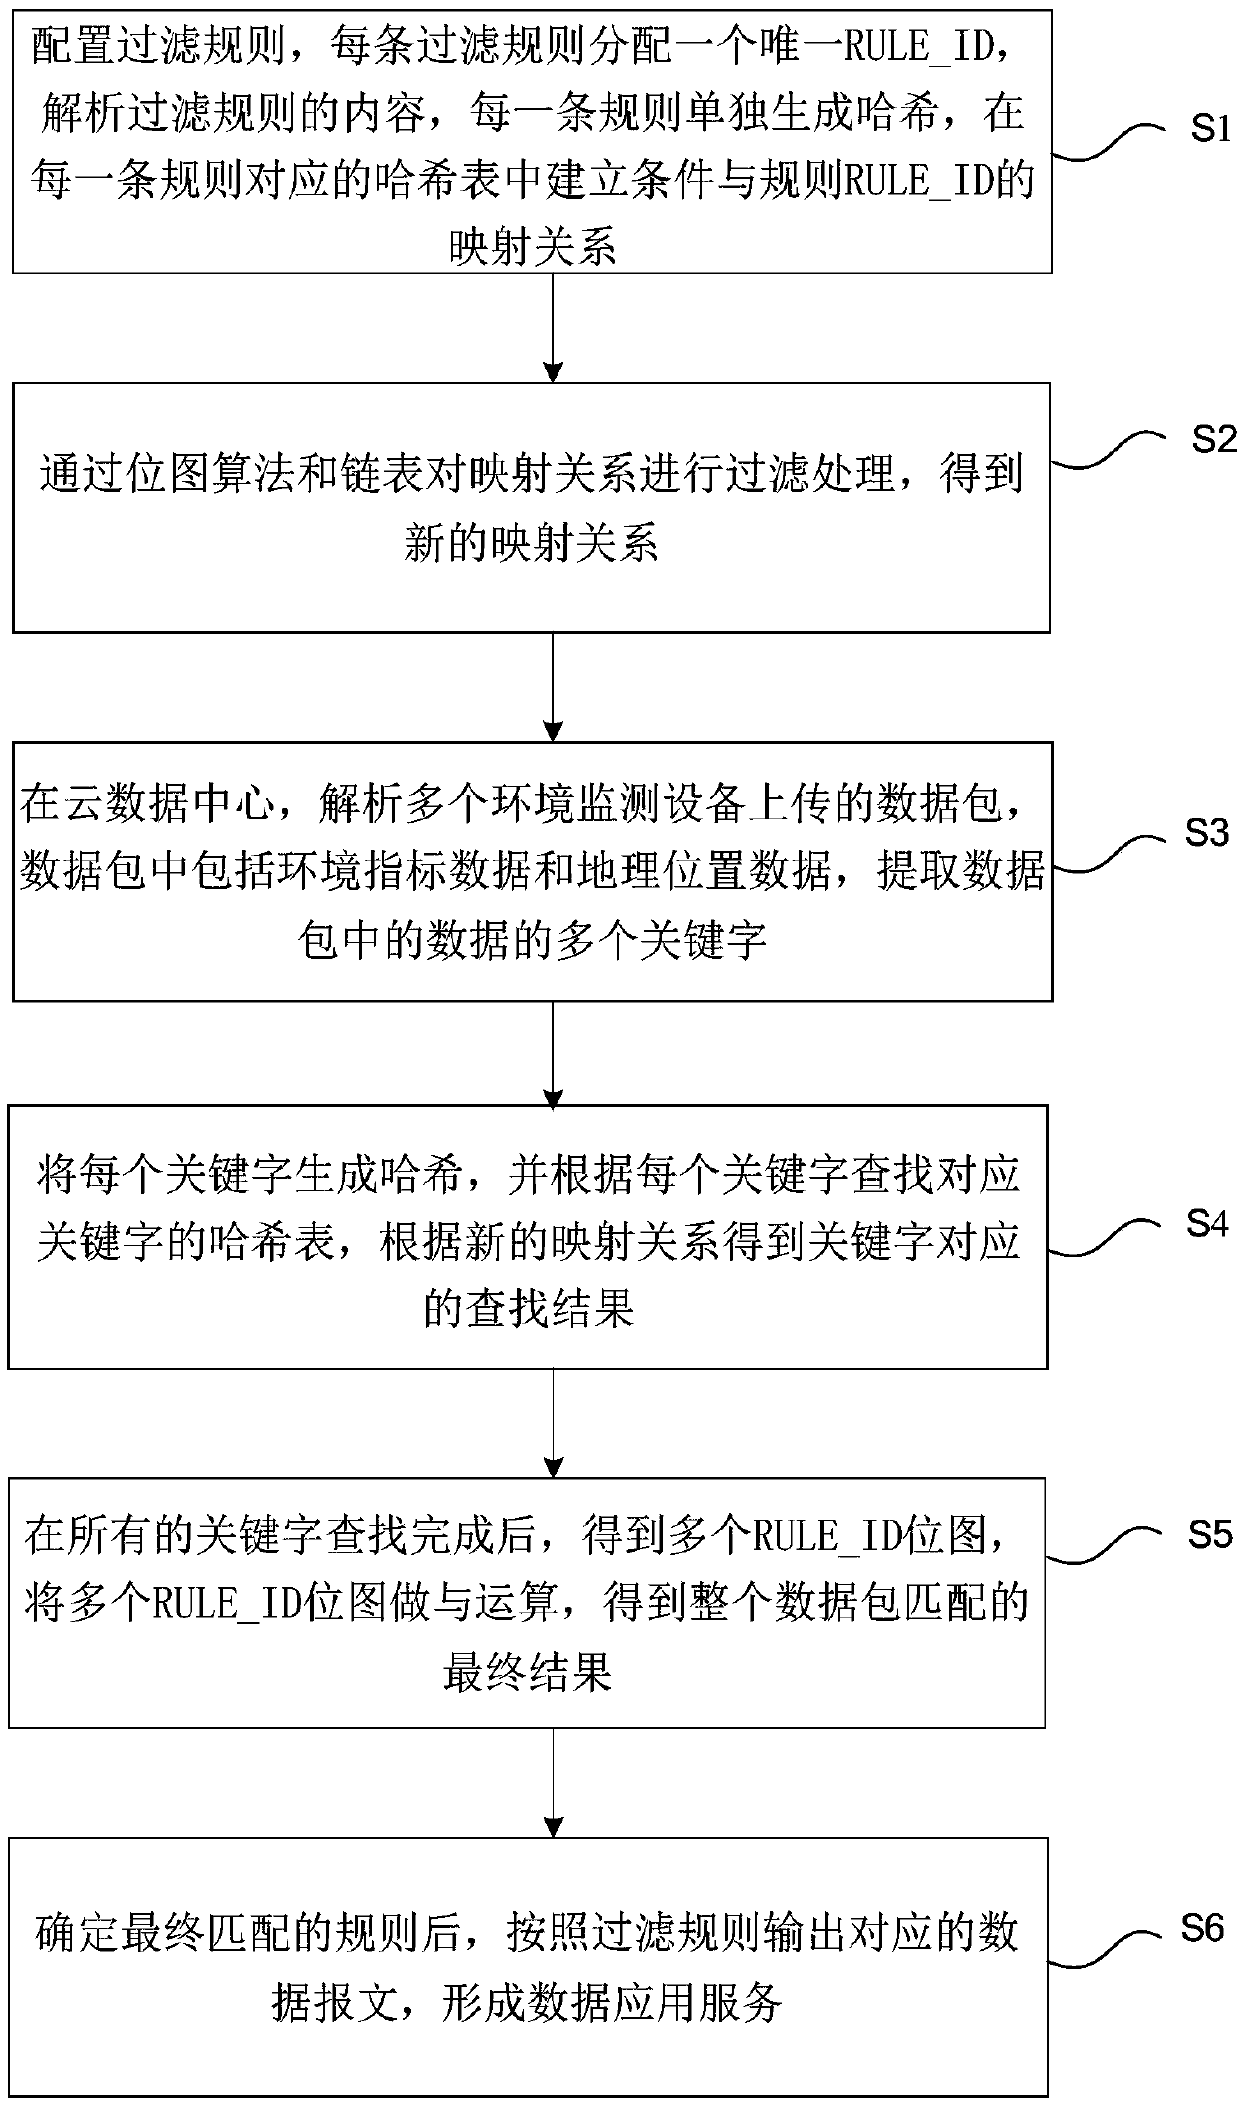 Internet of things environment large data-based information safety monitoring and managing method and system